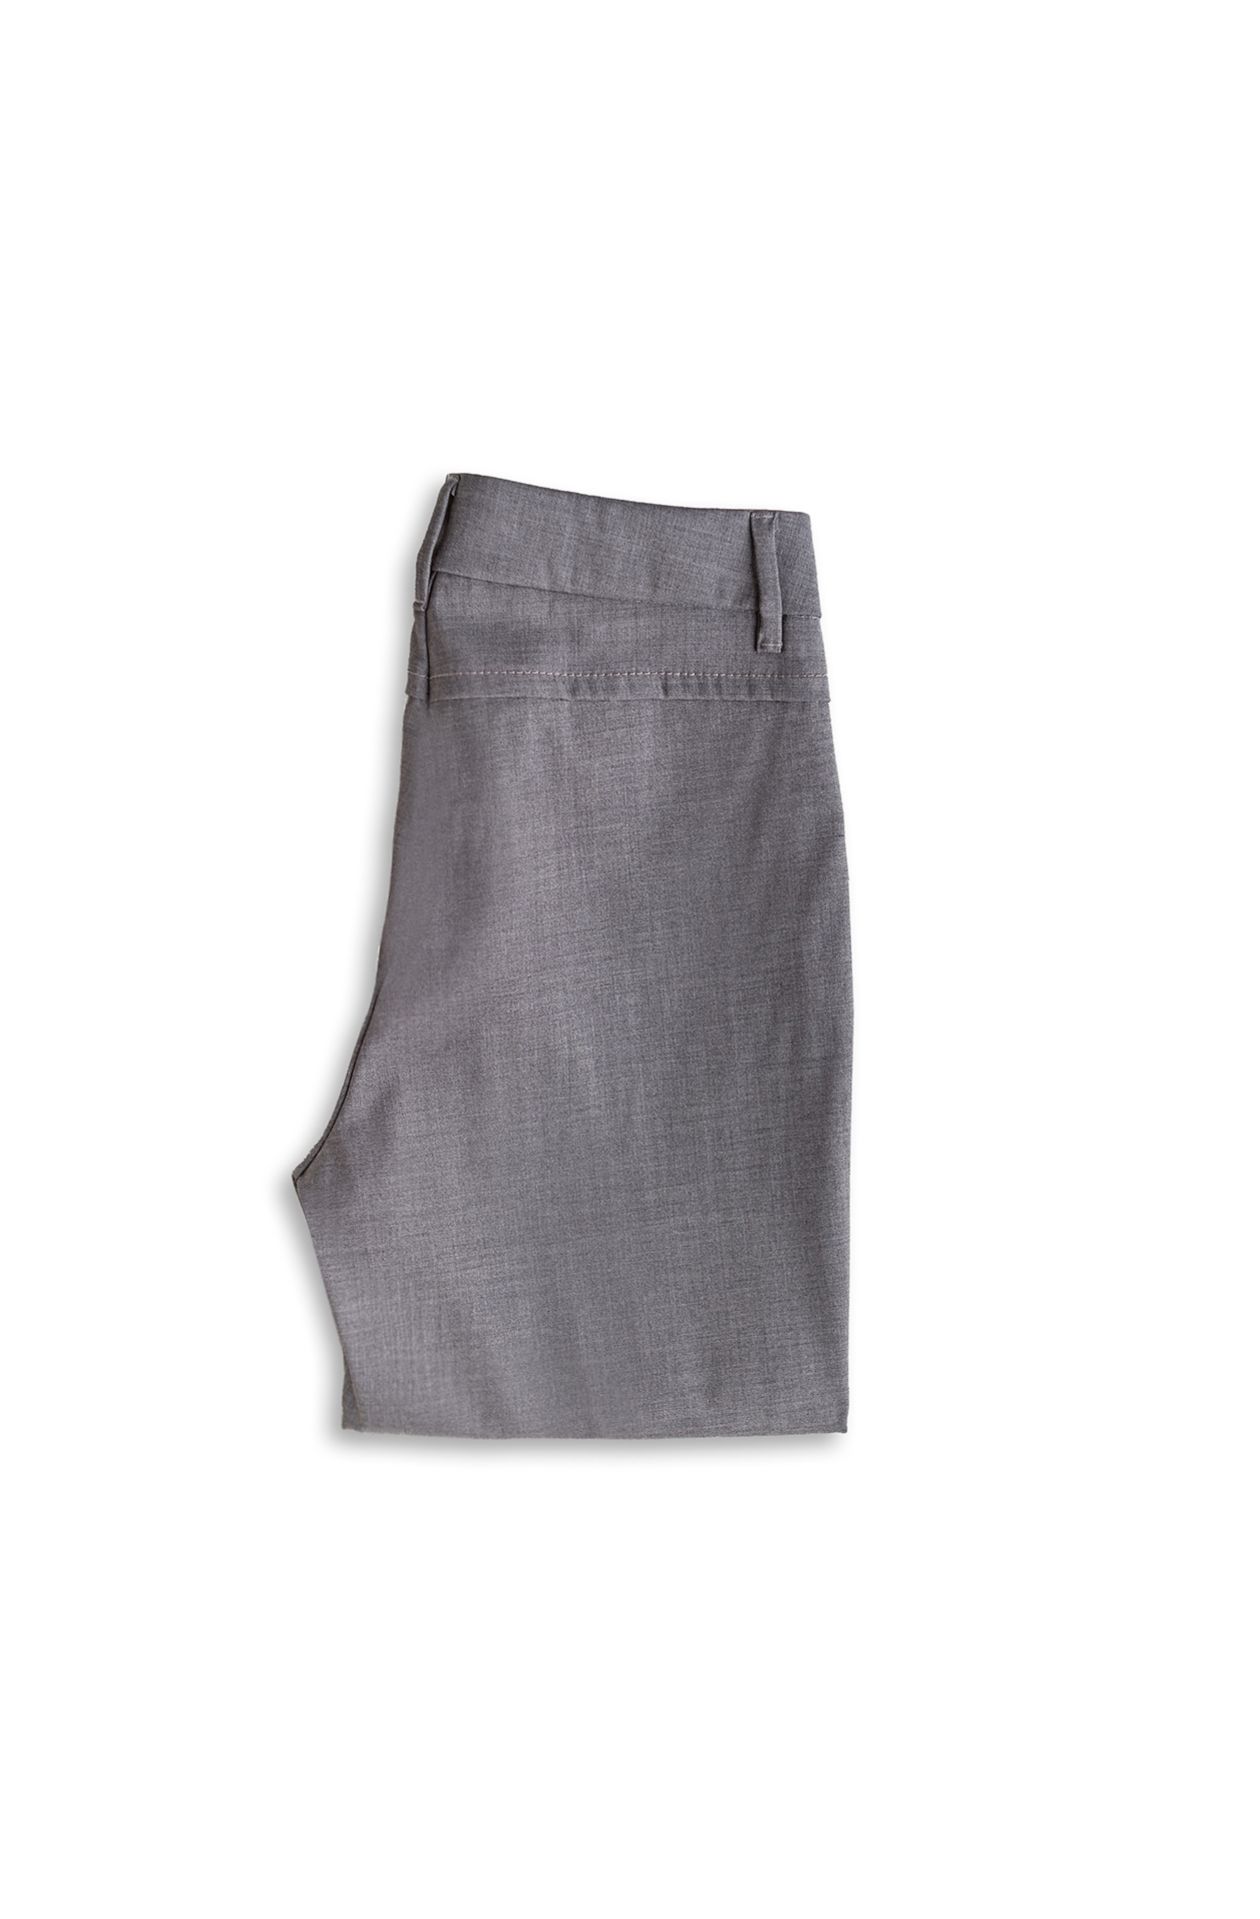 TROUSERS IN VISCOSE FABRIC